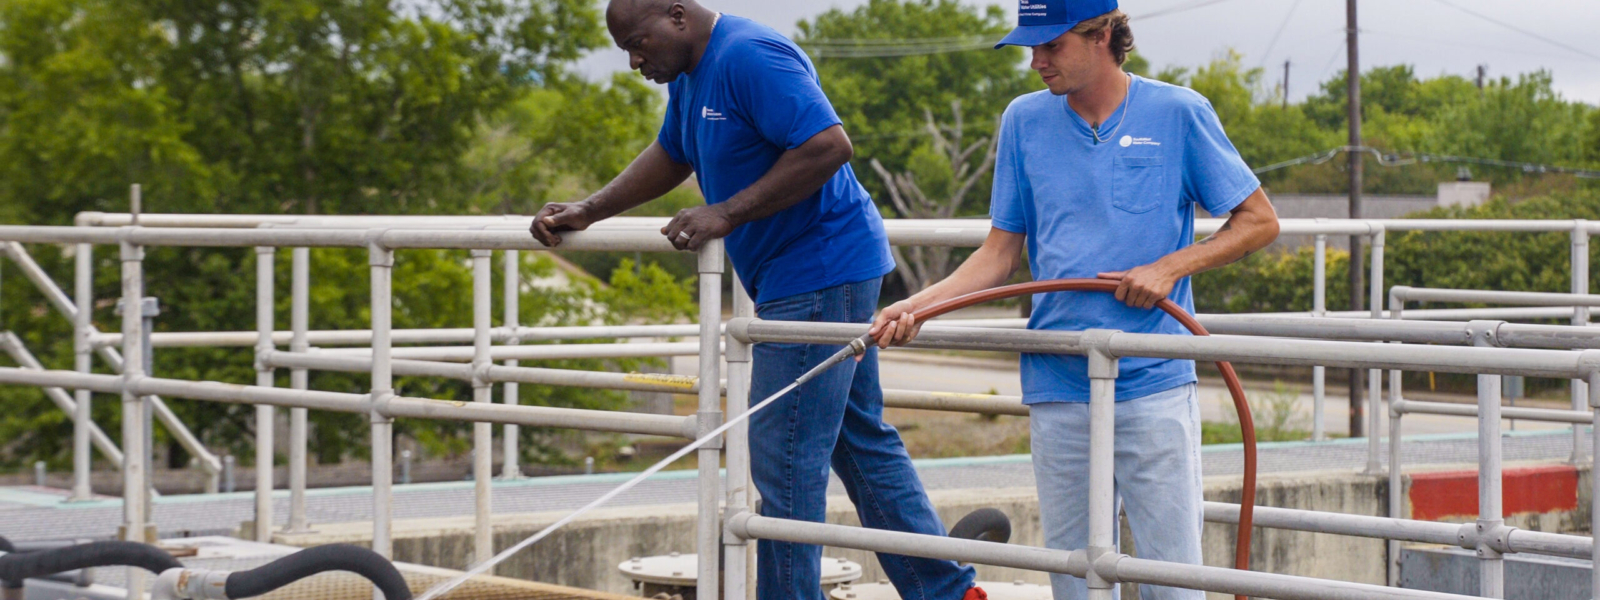 Texas Water Utilities invested $47.6 million in water and wastewater systems in 2022